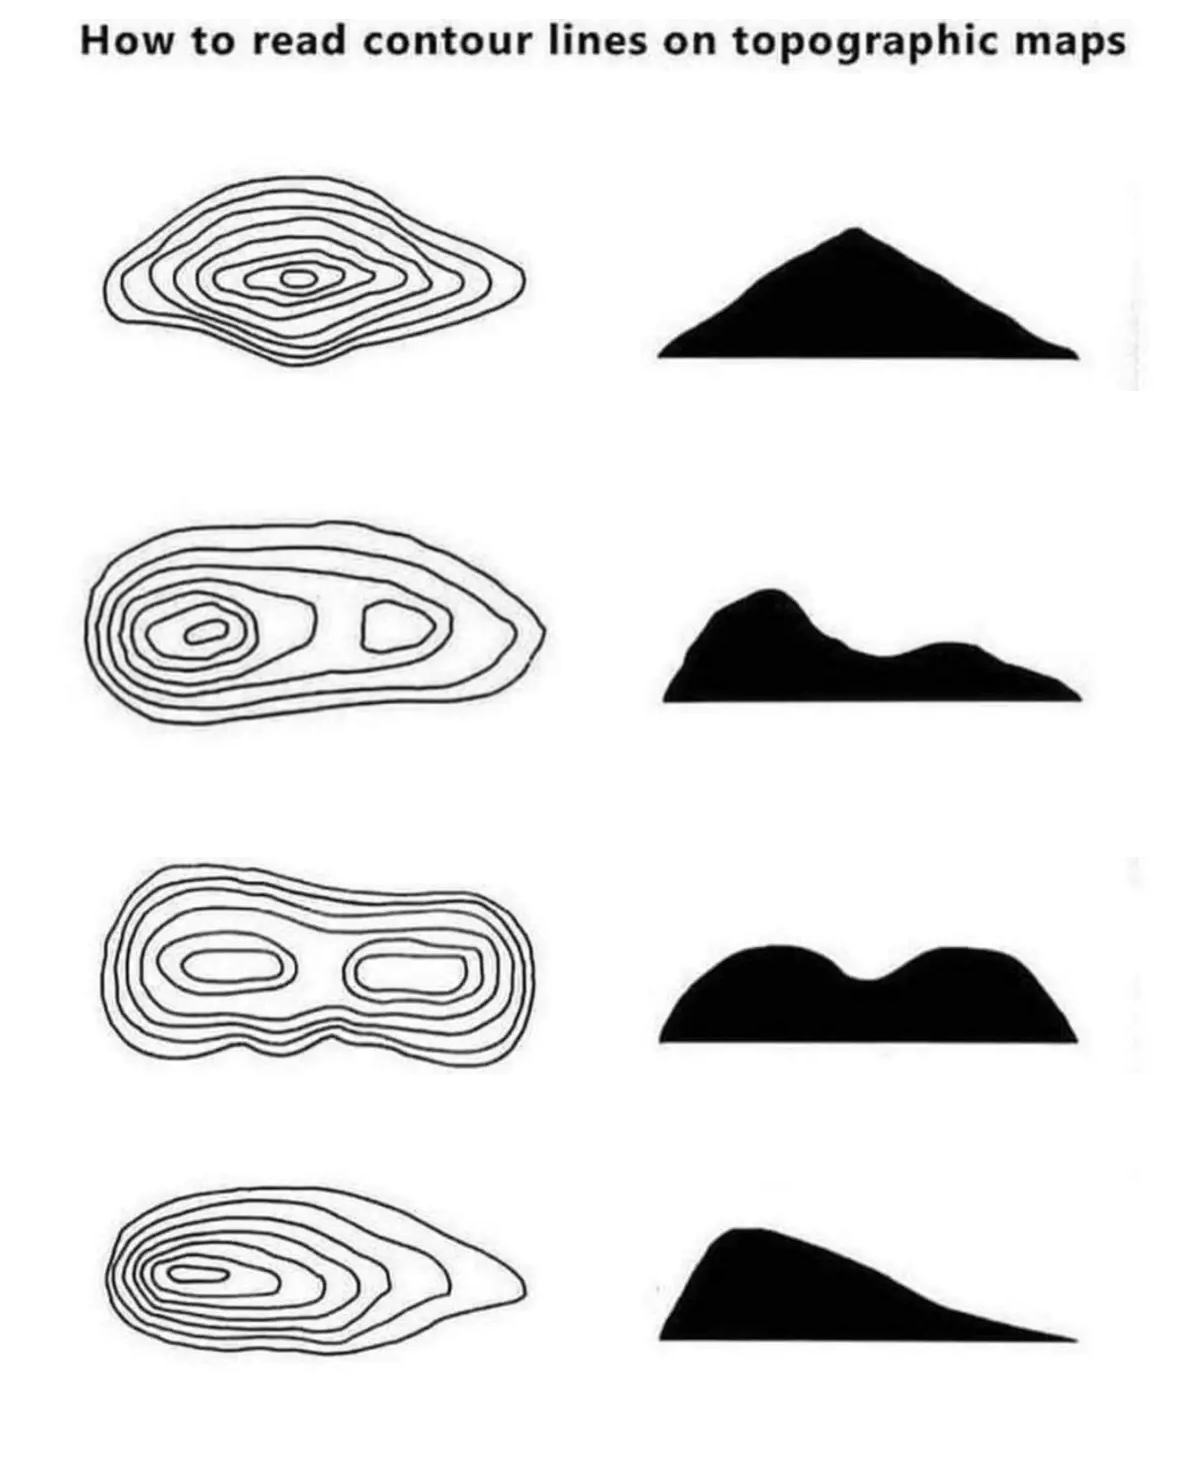 drawn graphic a single lonely hill, below it another graphic of high hill with a smaller hill on the right side, below it graphic of two high standing hills beside each other, below it graphic of a high hill with another hill that has fallen and is flat